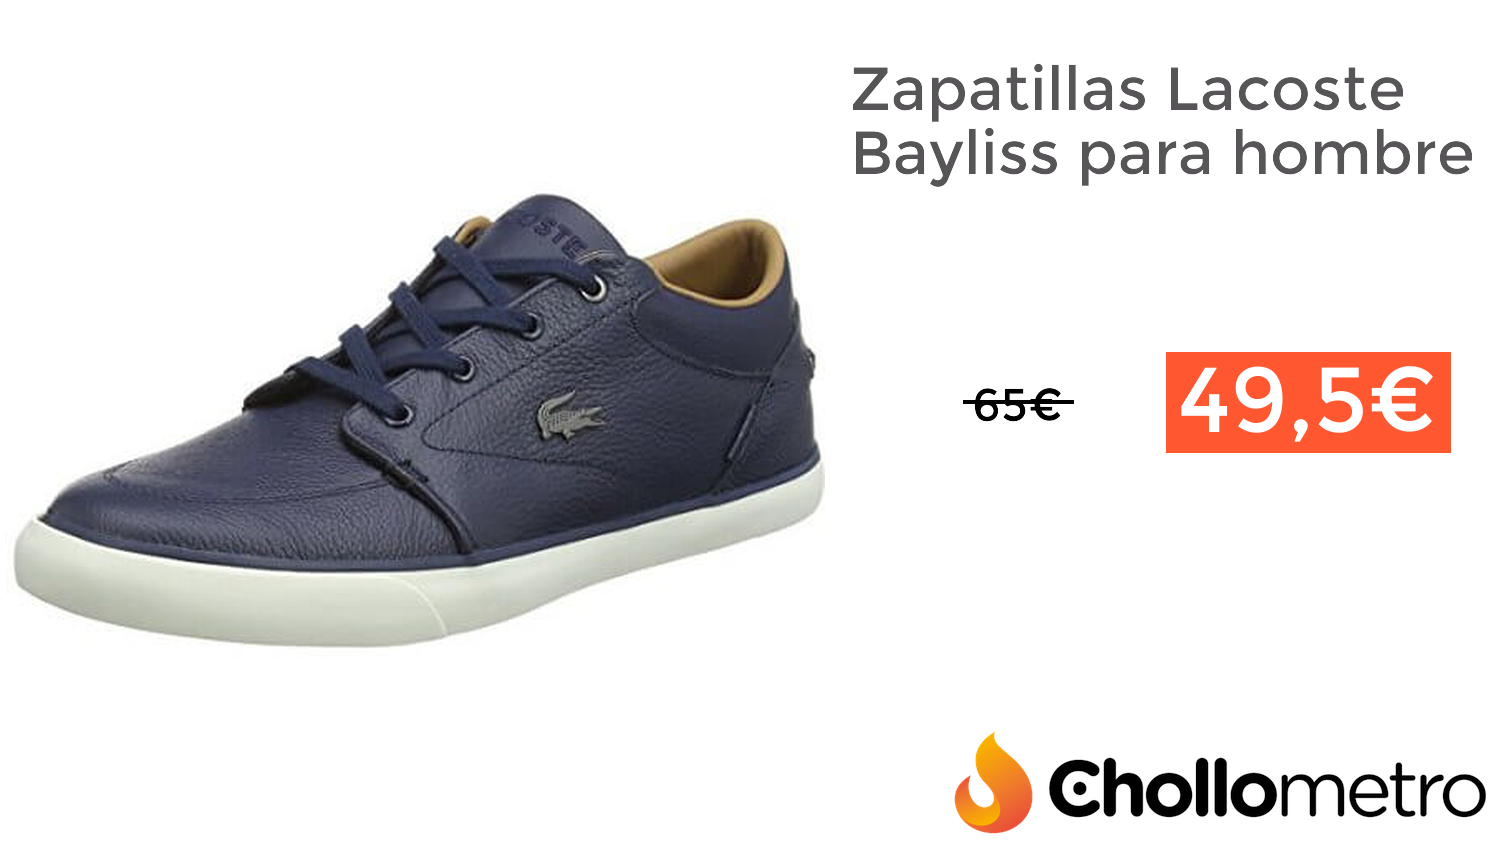 Chollometro on Twitter: Zapatillas Lacoste Bayliss para hombre por 49,5€ https://t.co/oOlvUunCTw" / Twitter